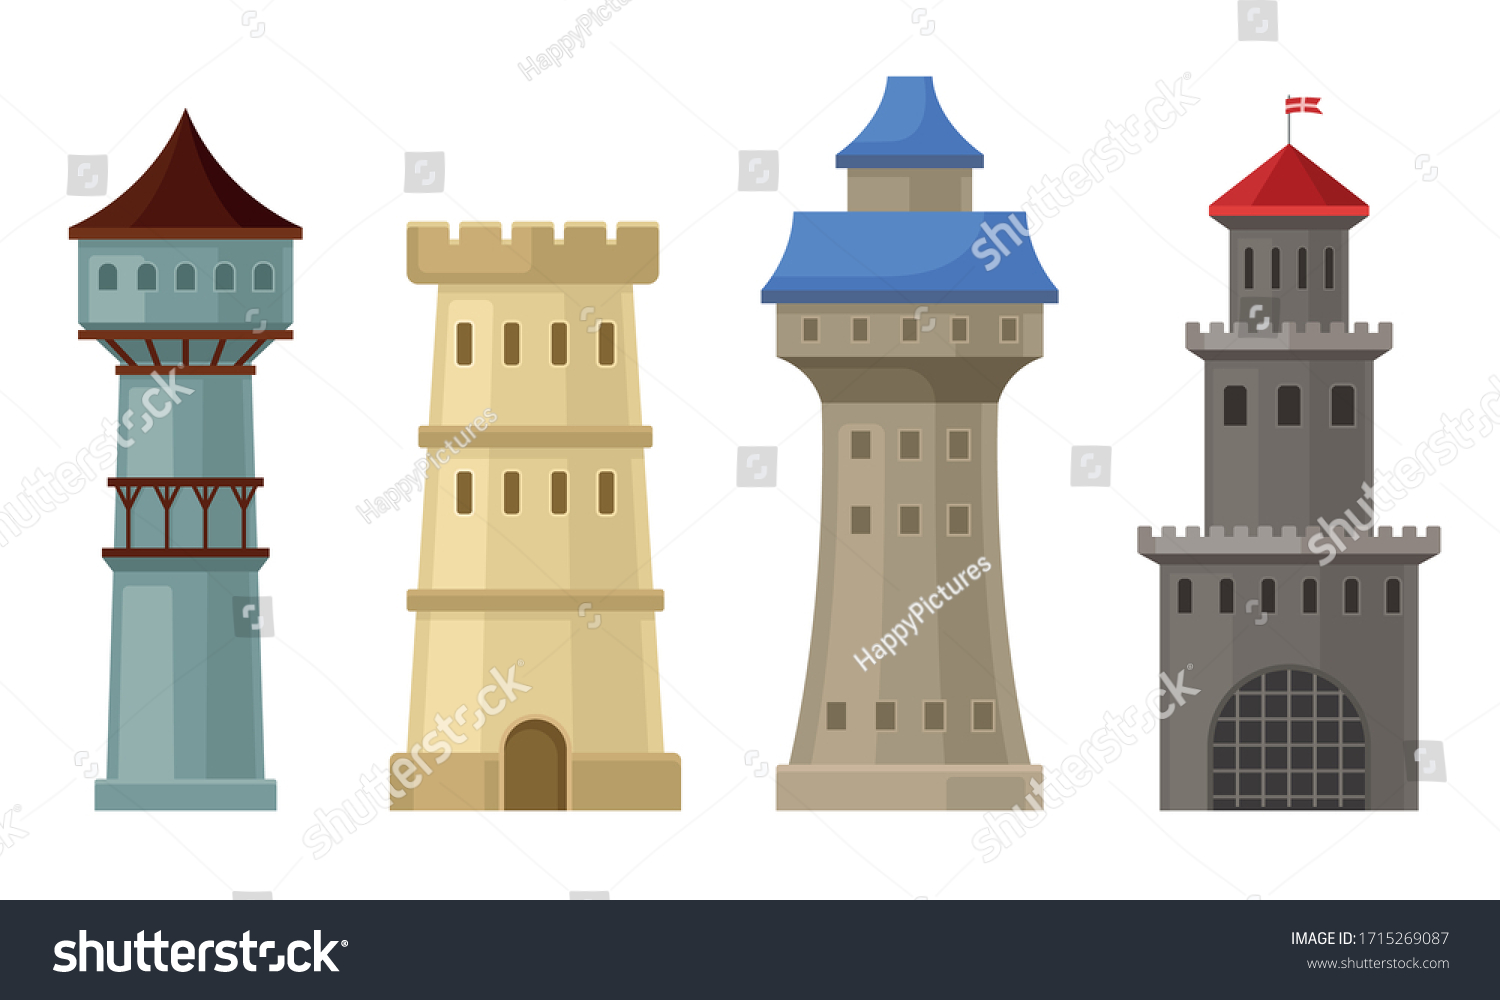 SVG of High Stone Towers with Castellation Walls and Windows Vector Set svg